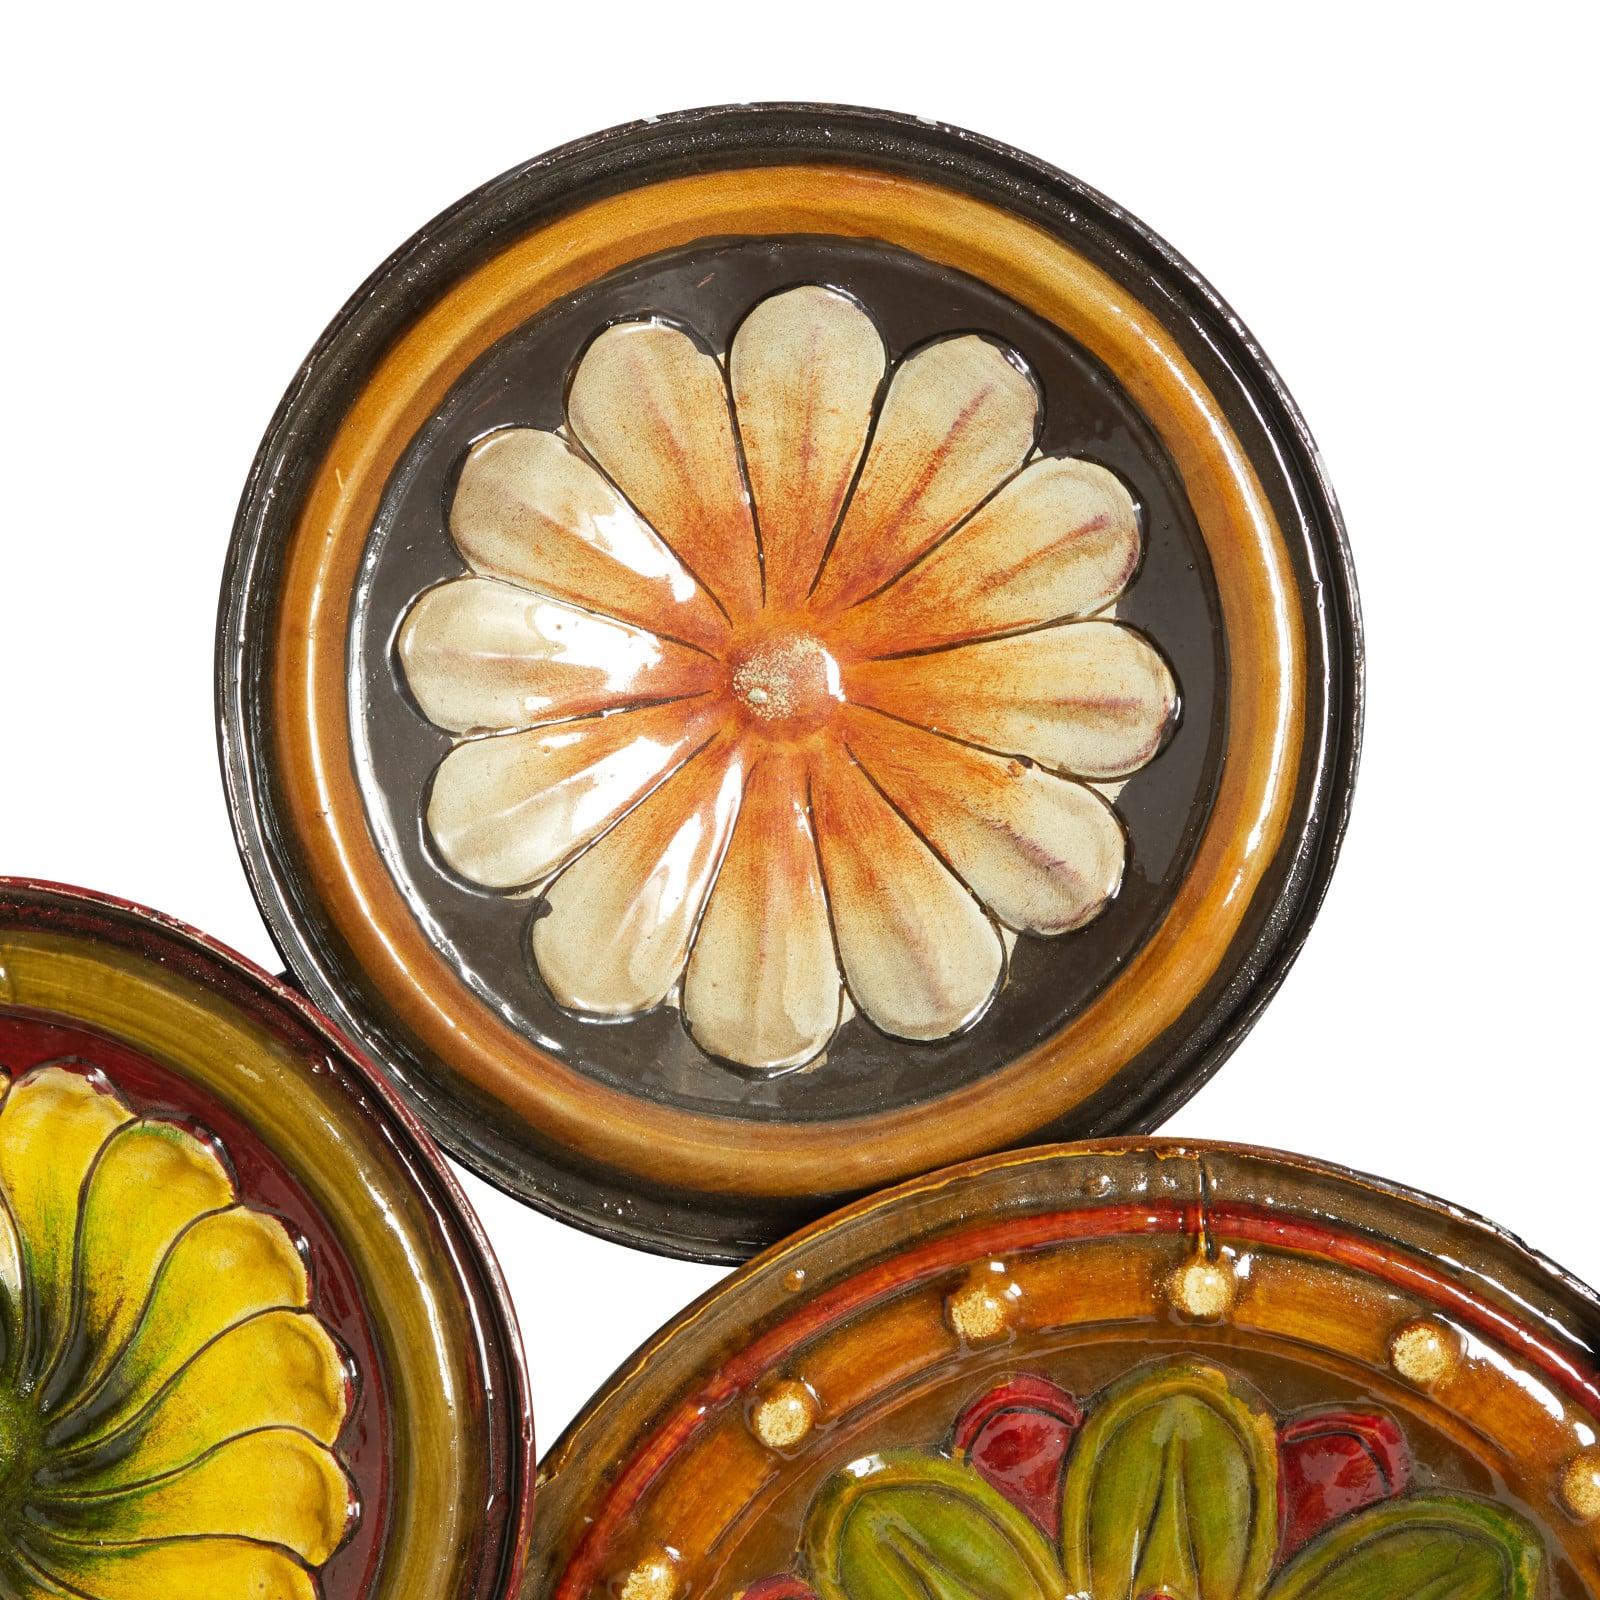 Green &#x26; Yellow Iron Floral Plates Wall Decoration